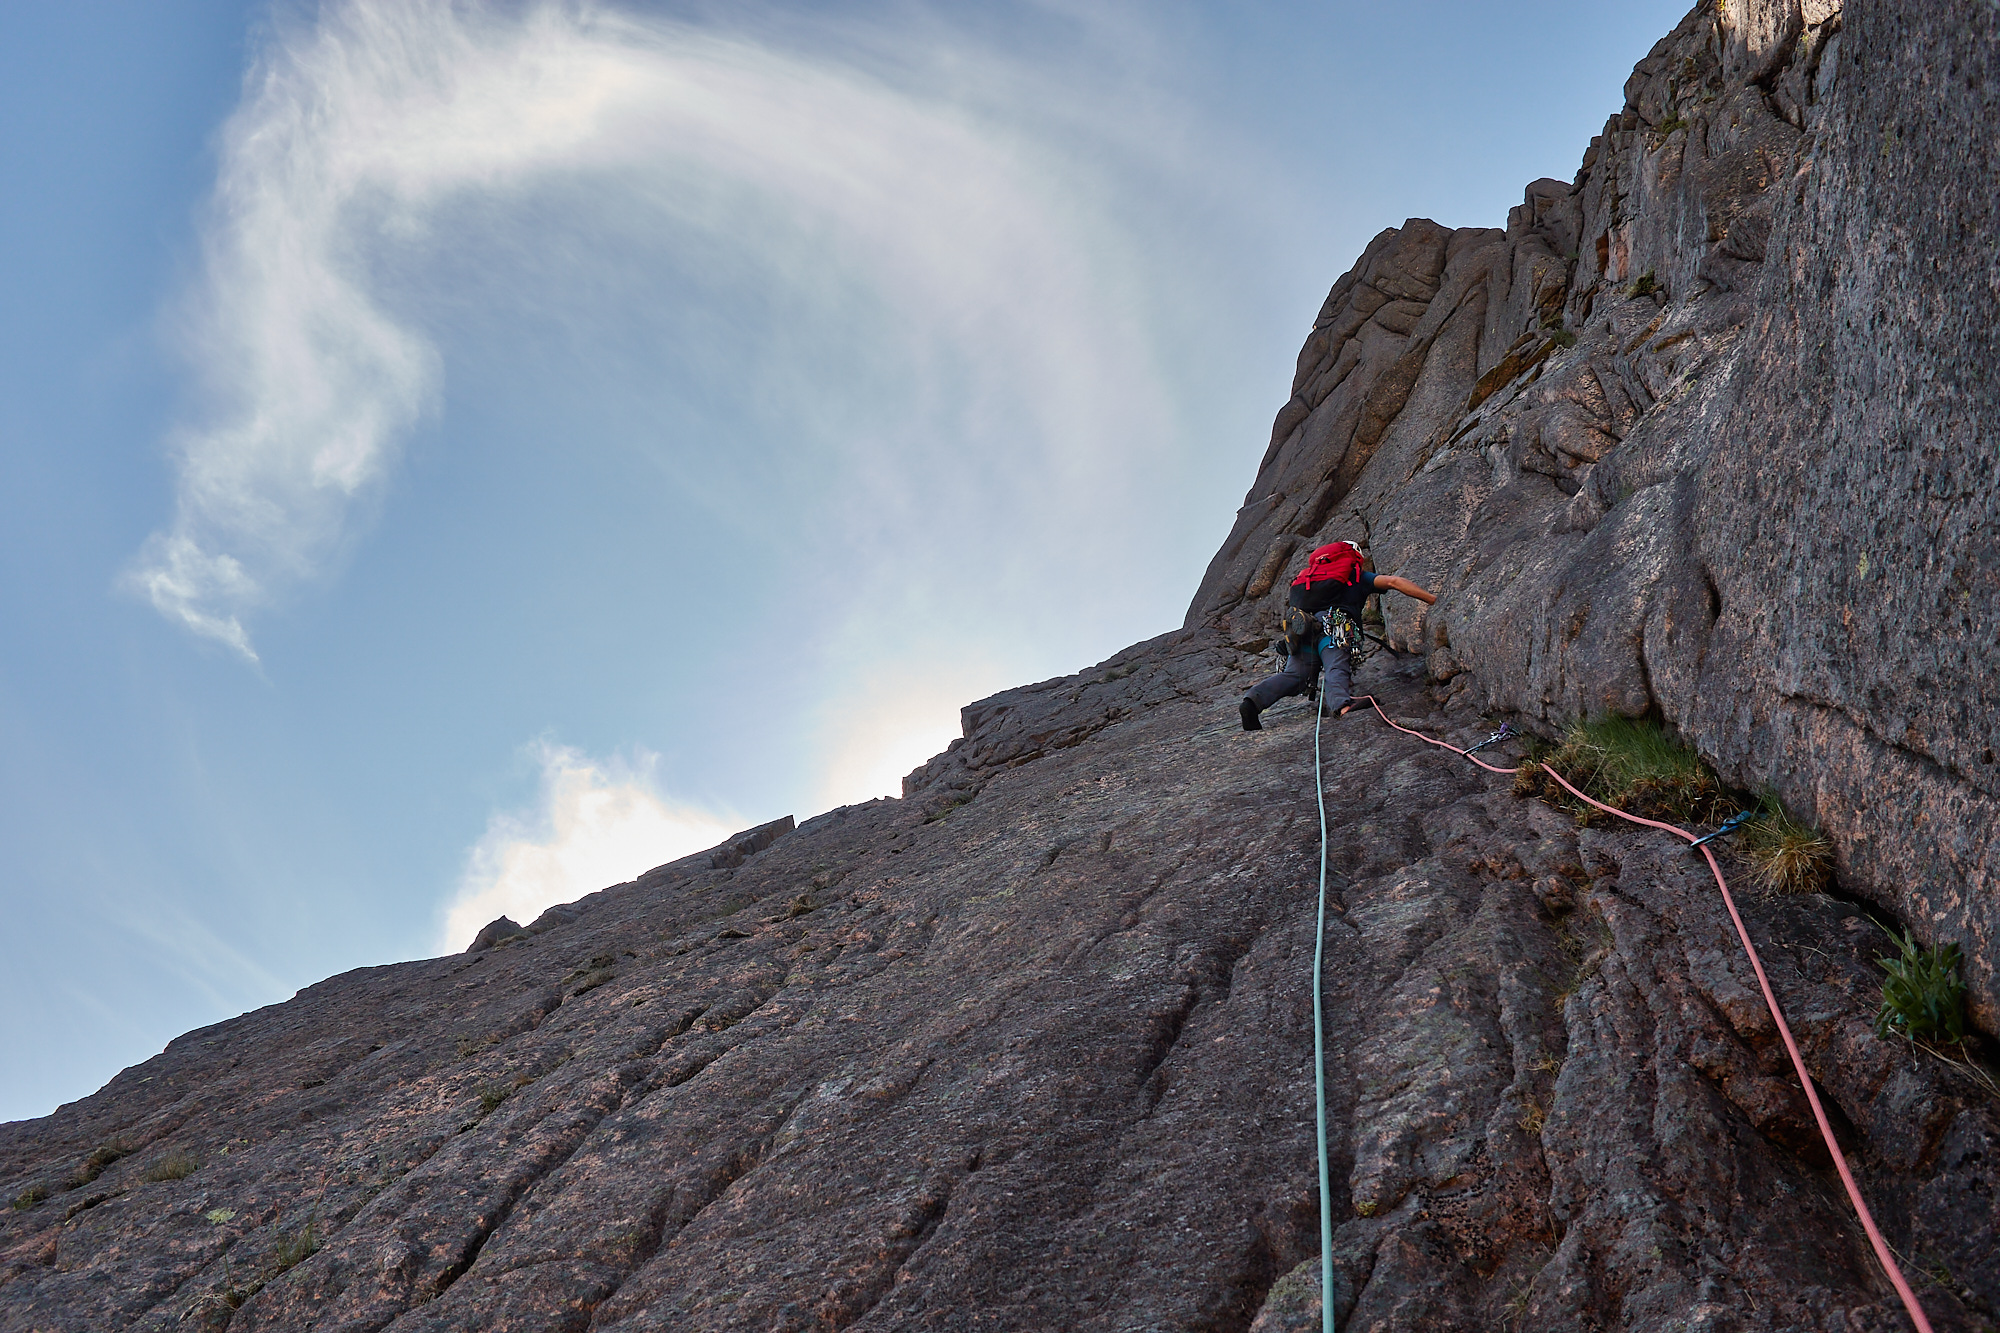 A climber on the Grey Slab pitch of the rock climb Grey Slab in Coire Sputan Dearg in the Cairngorms on a sunny day